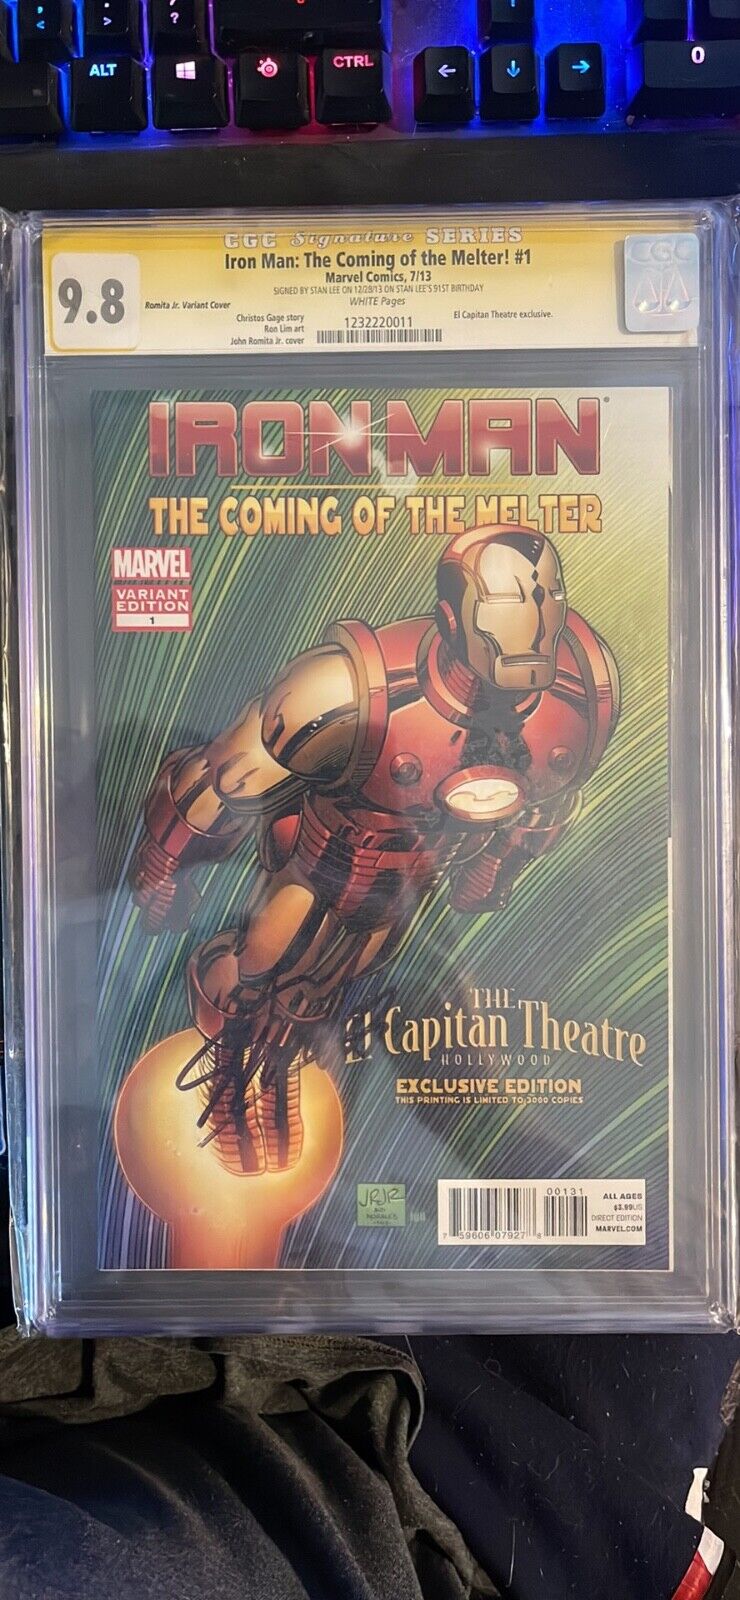 Iron Man The Coming of the Melter #1 